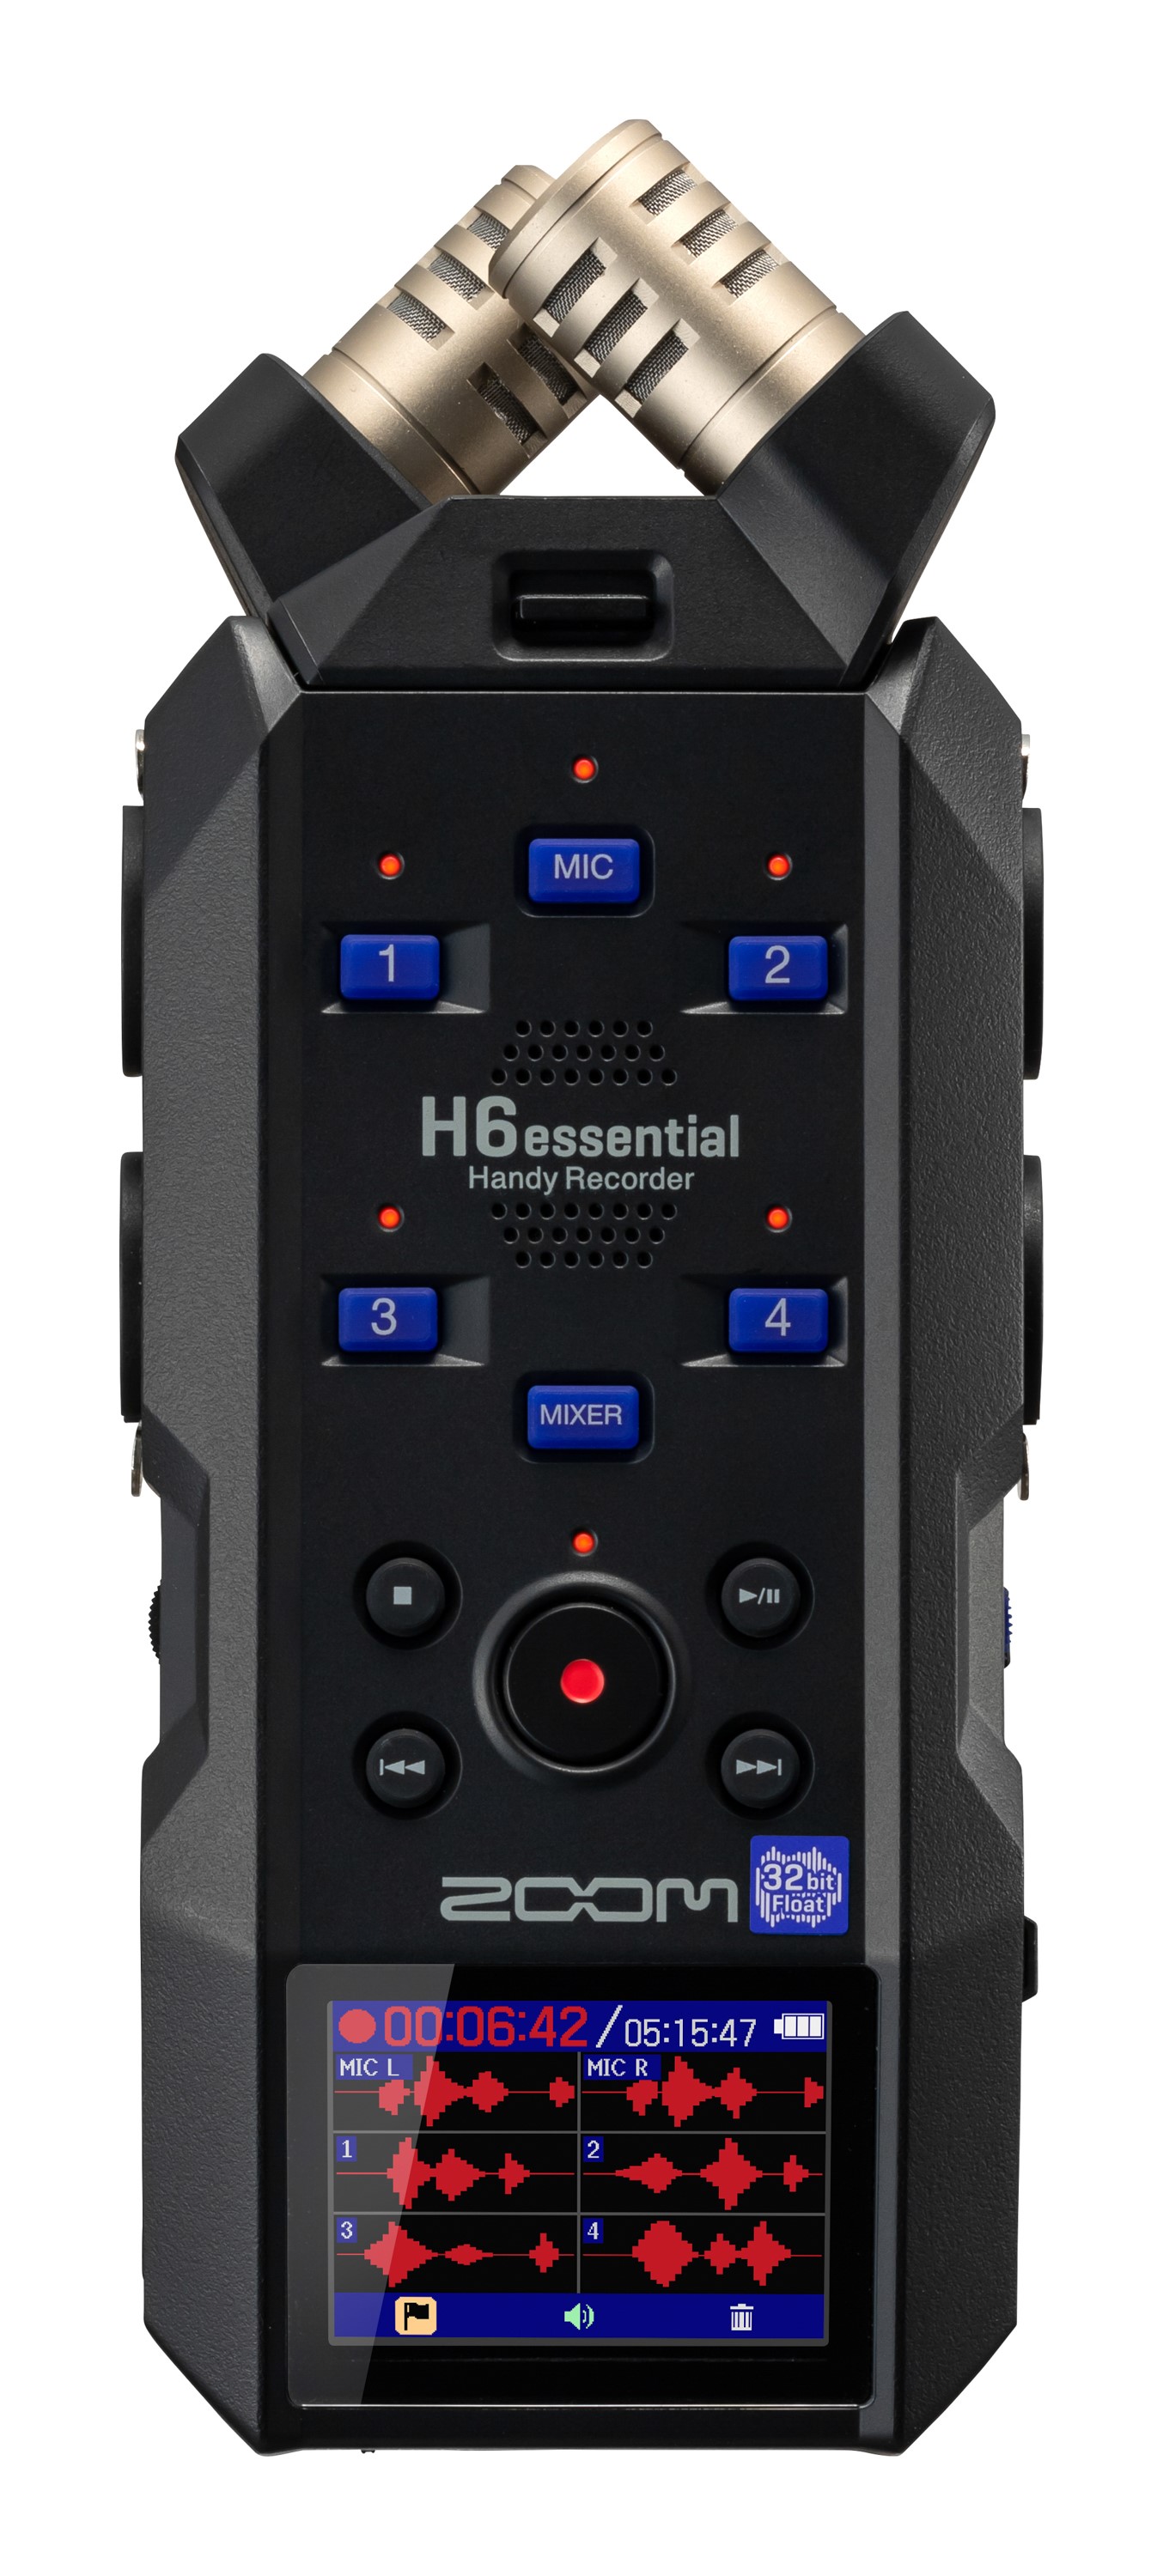 The Zoom H6 Audio Recorder - Complete Review and Sample Audio! 